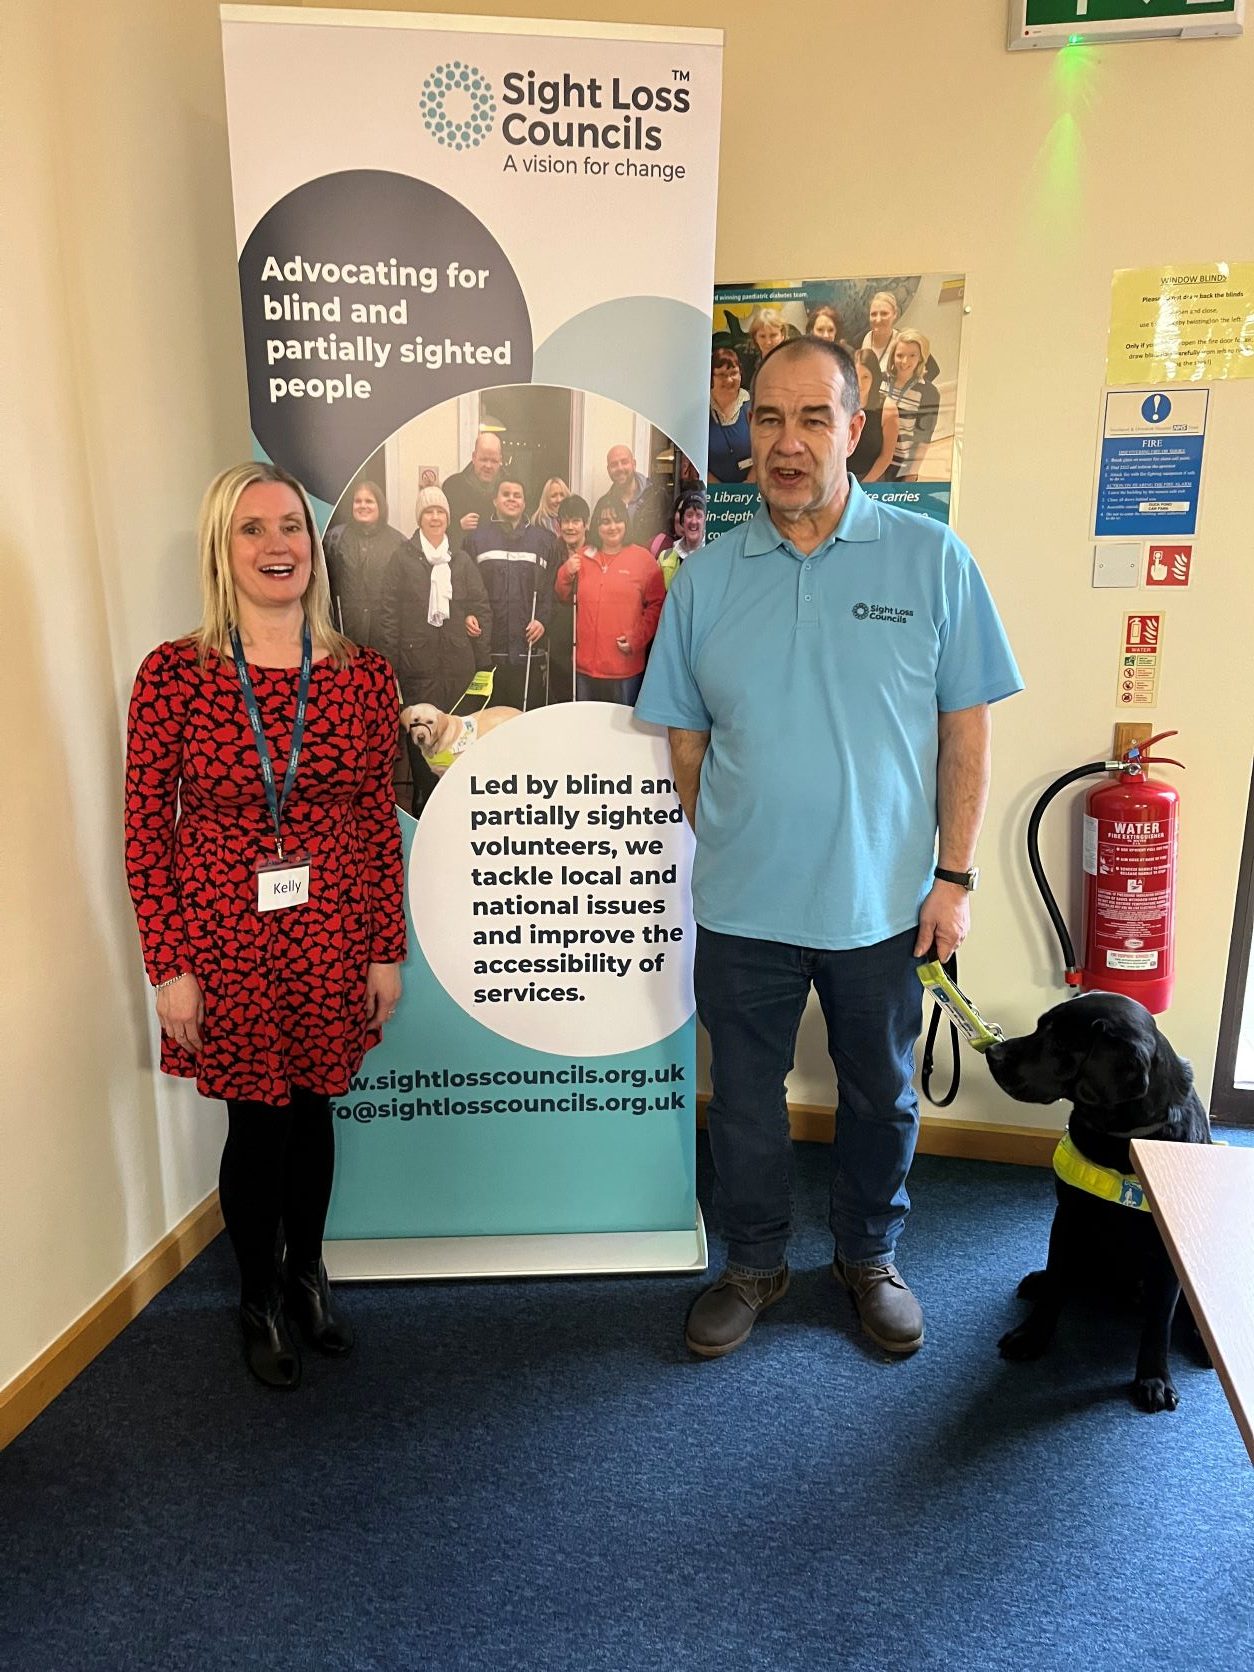 Kelly Barton, engagement manager for the north east, and Merseyside SLC member, Mick, standing in front of the Sight Loss Councils banner. Mick's guide dog Kip is sitting next to Mick.